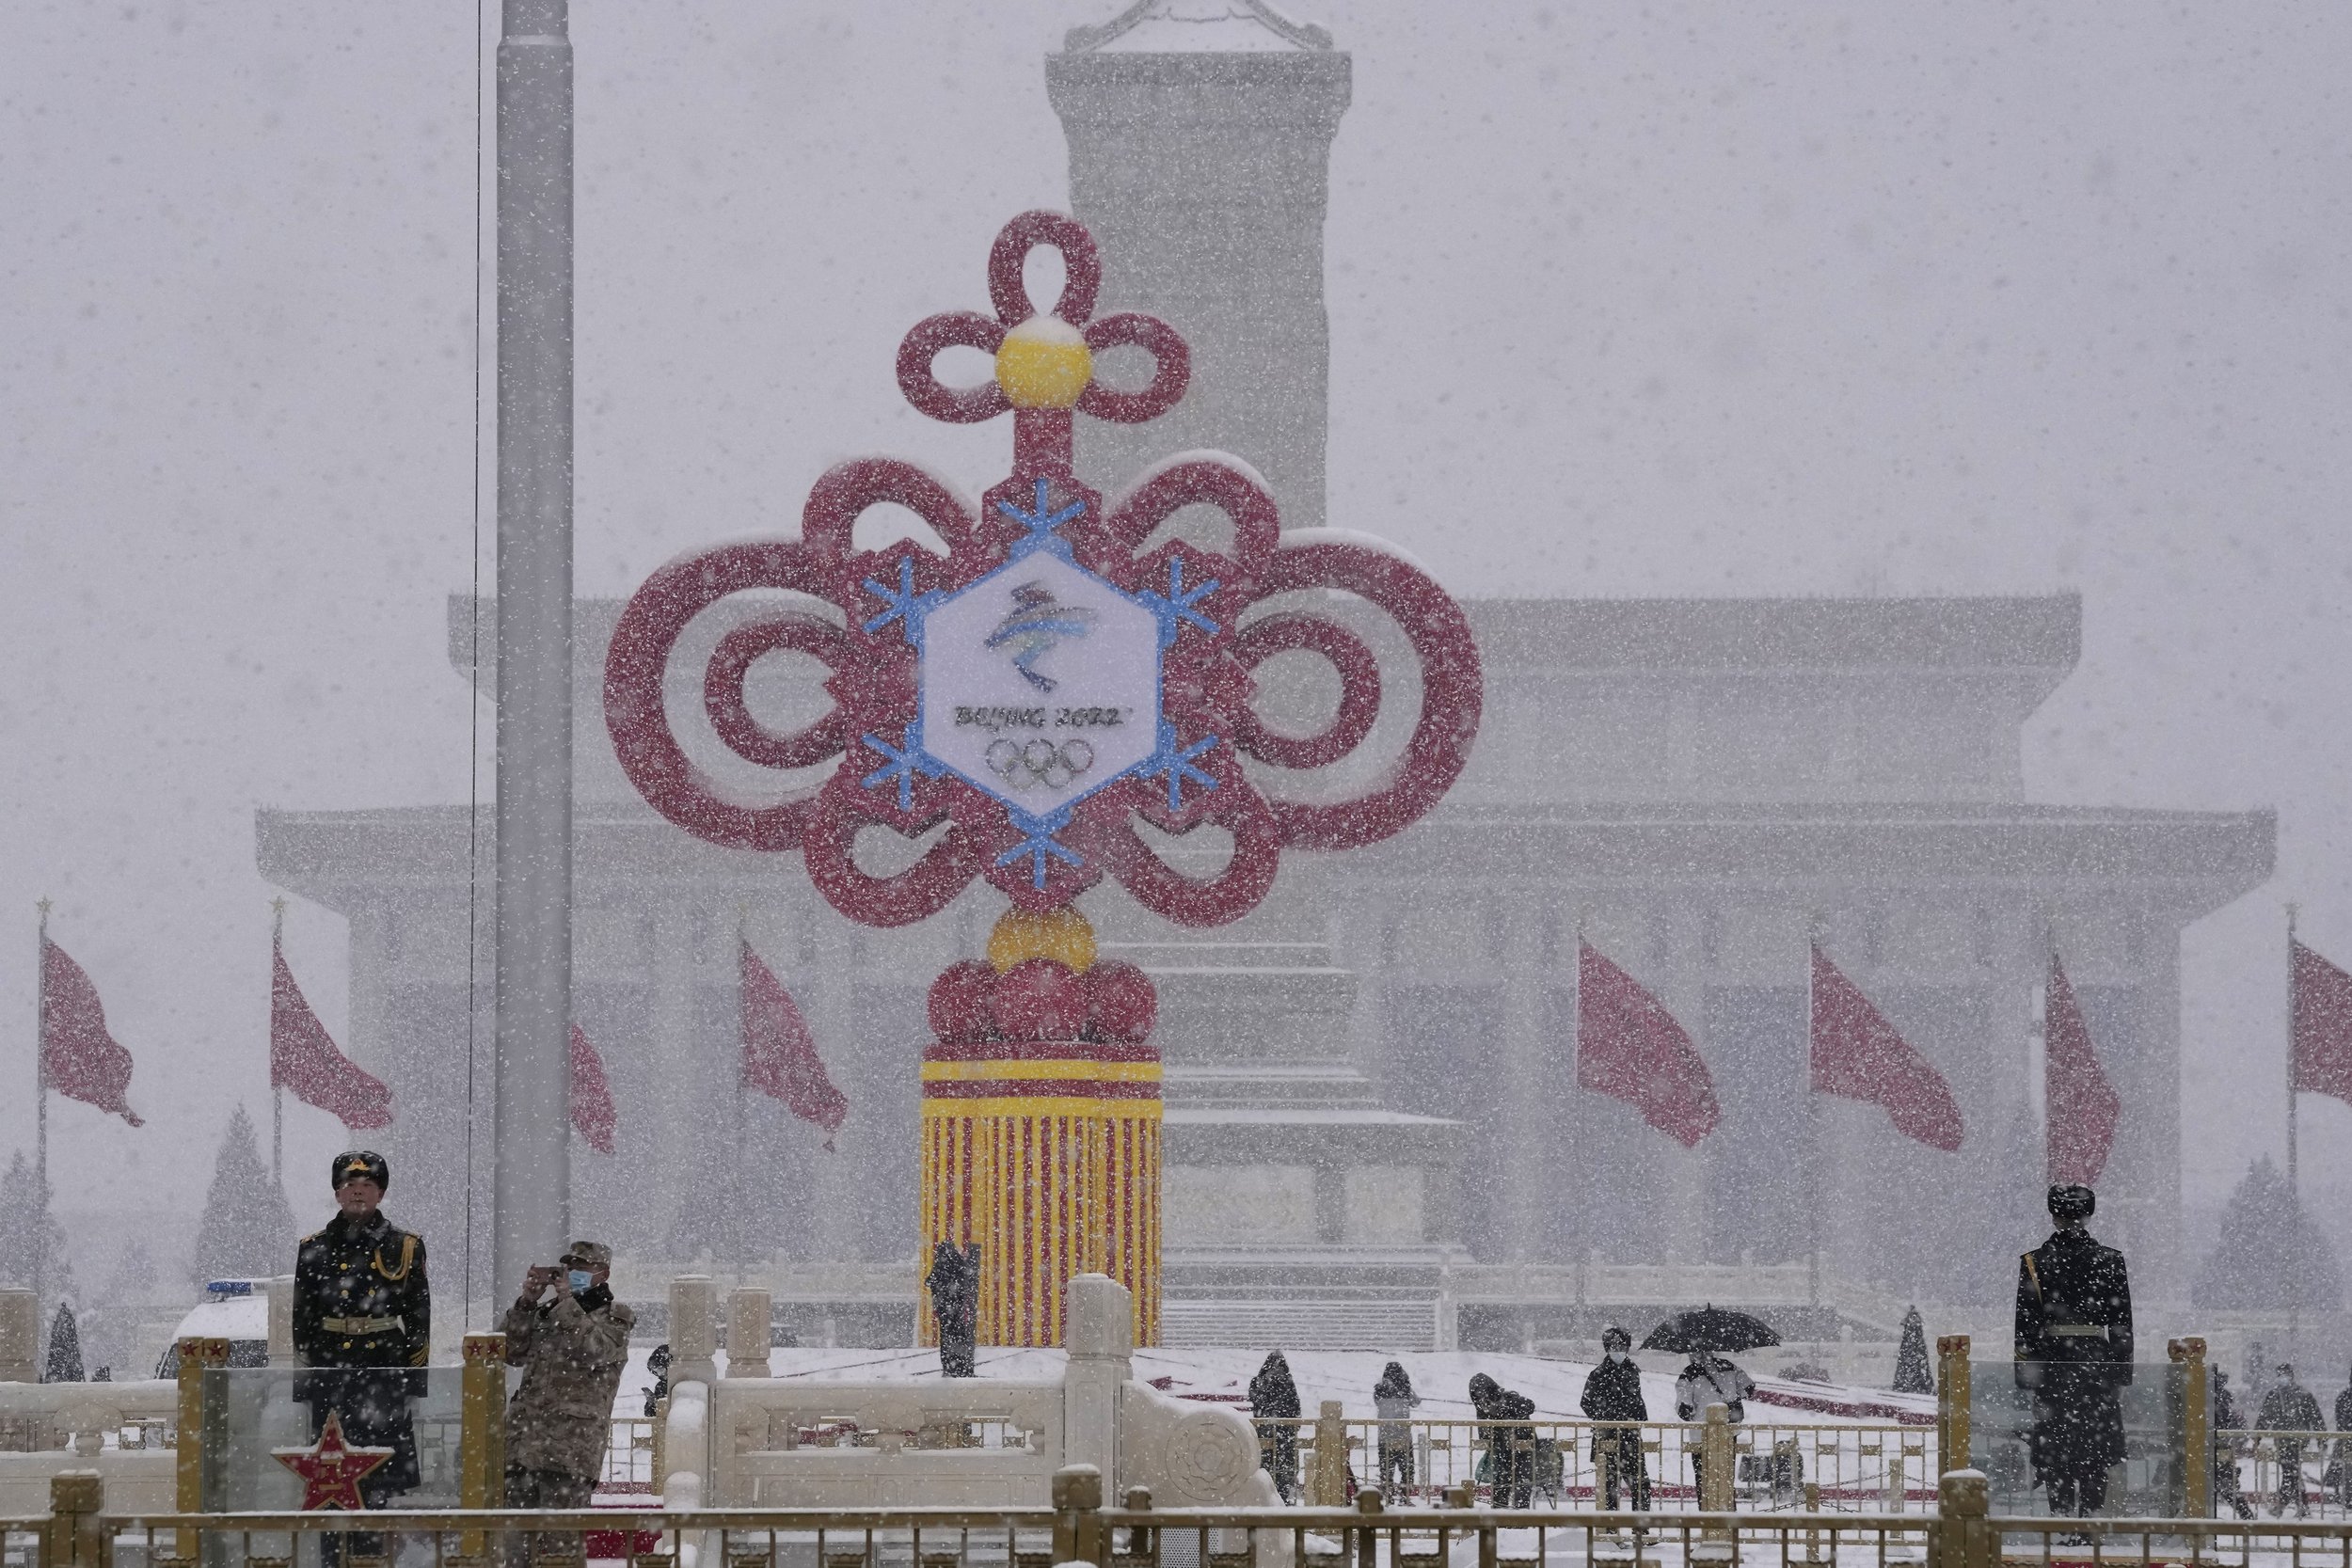  A giant decoration for the 2022 Winter Olympics stands on Tiananmen Square as it snows in Beijing on Sunday, Feb. 13, 2022. (AP Photo/Ng Han Guan) 